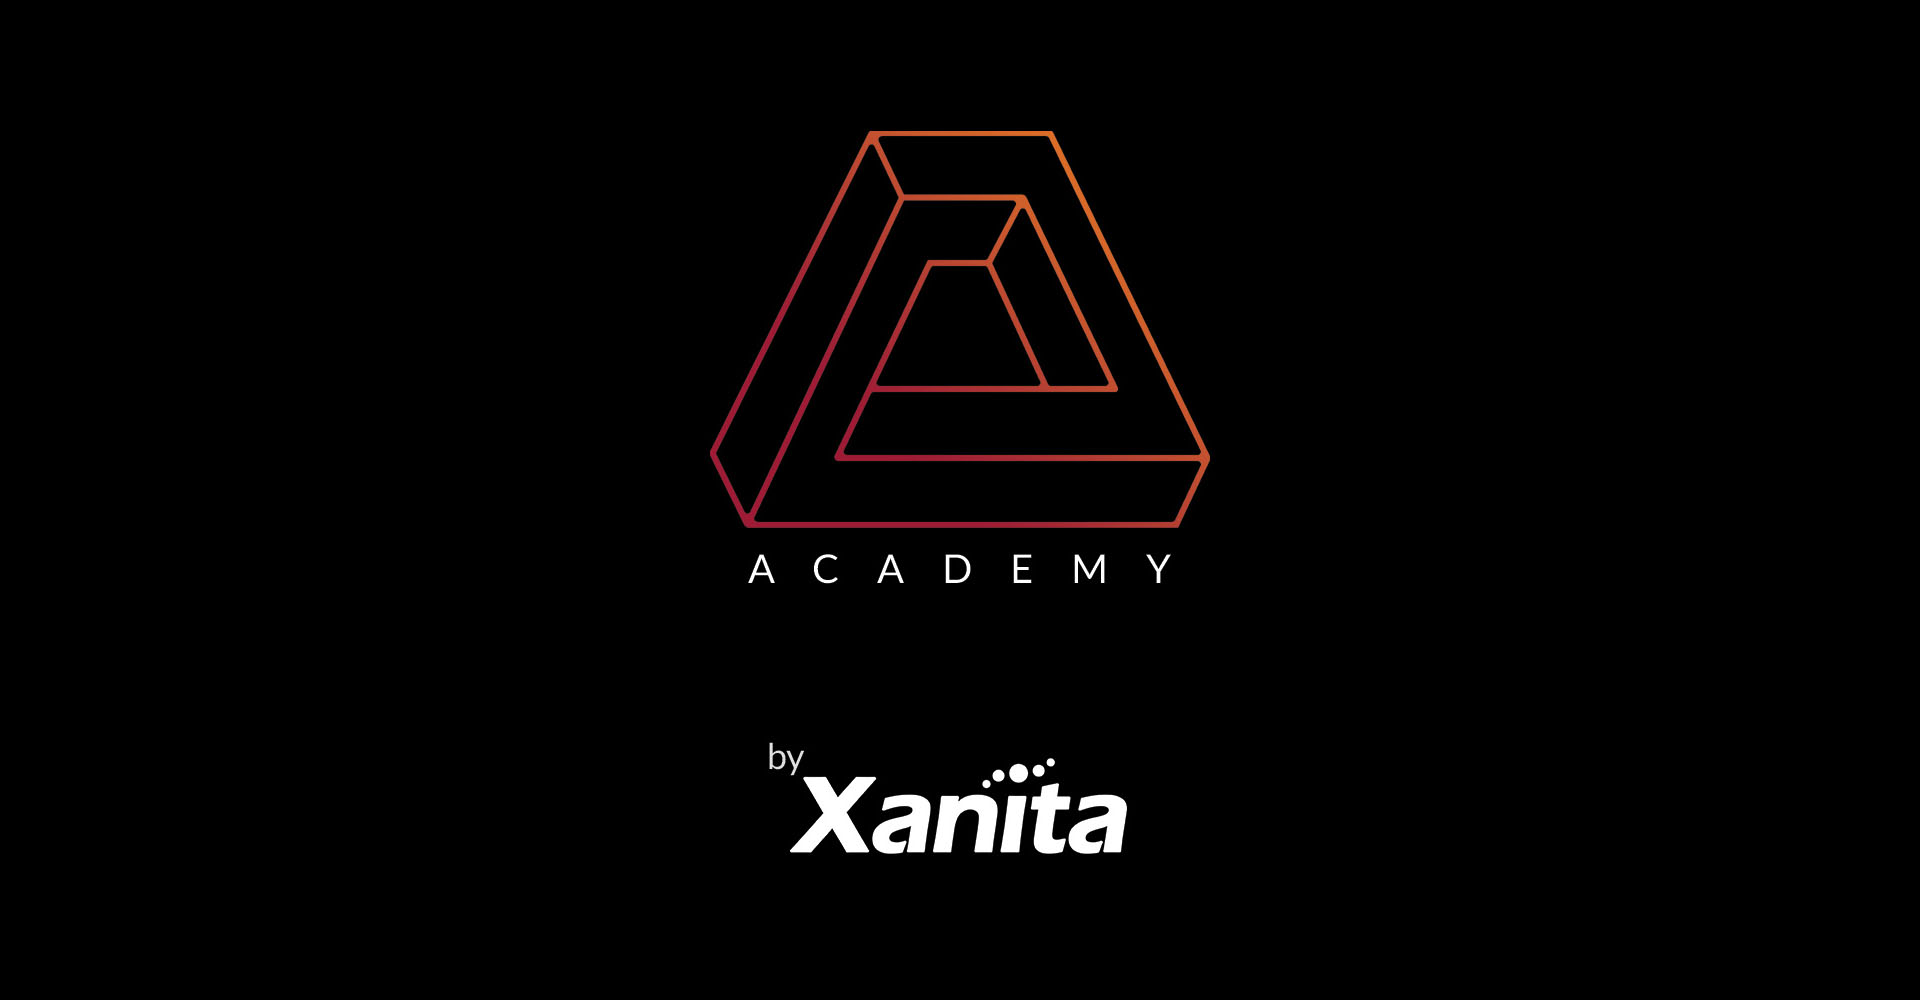 Welcome to the new Xanita Academy